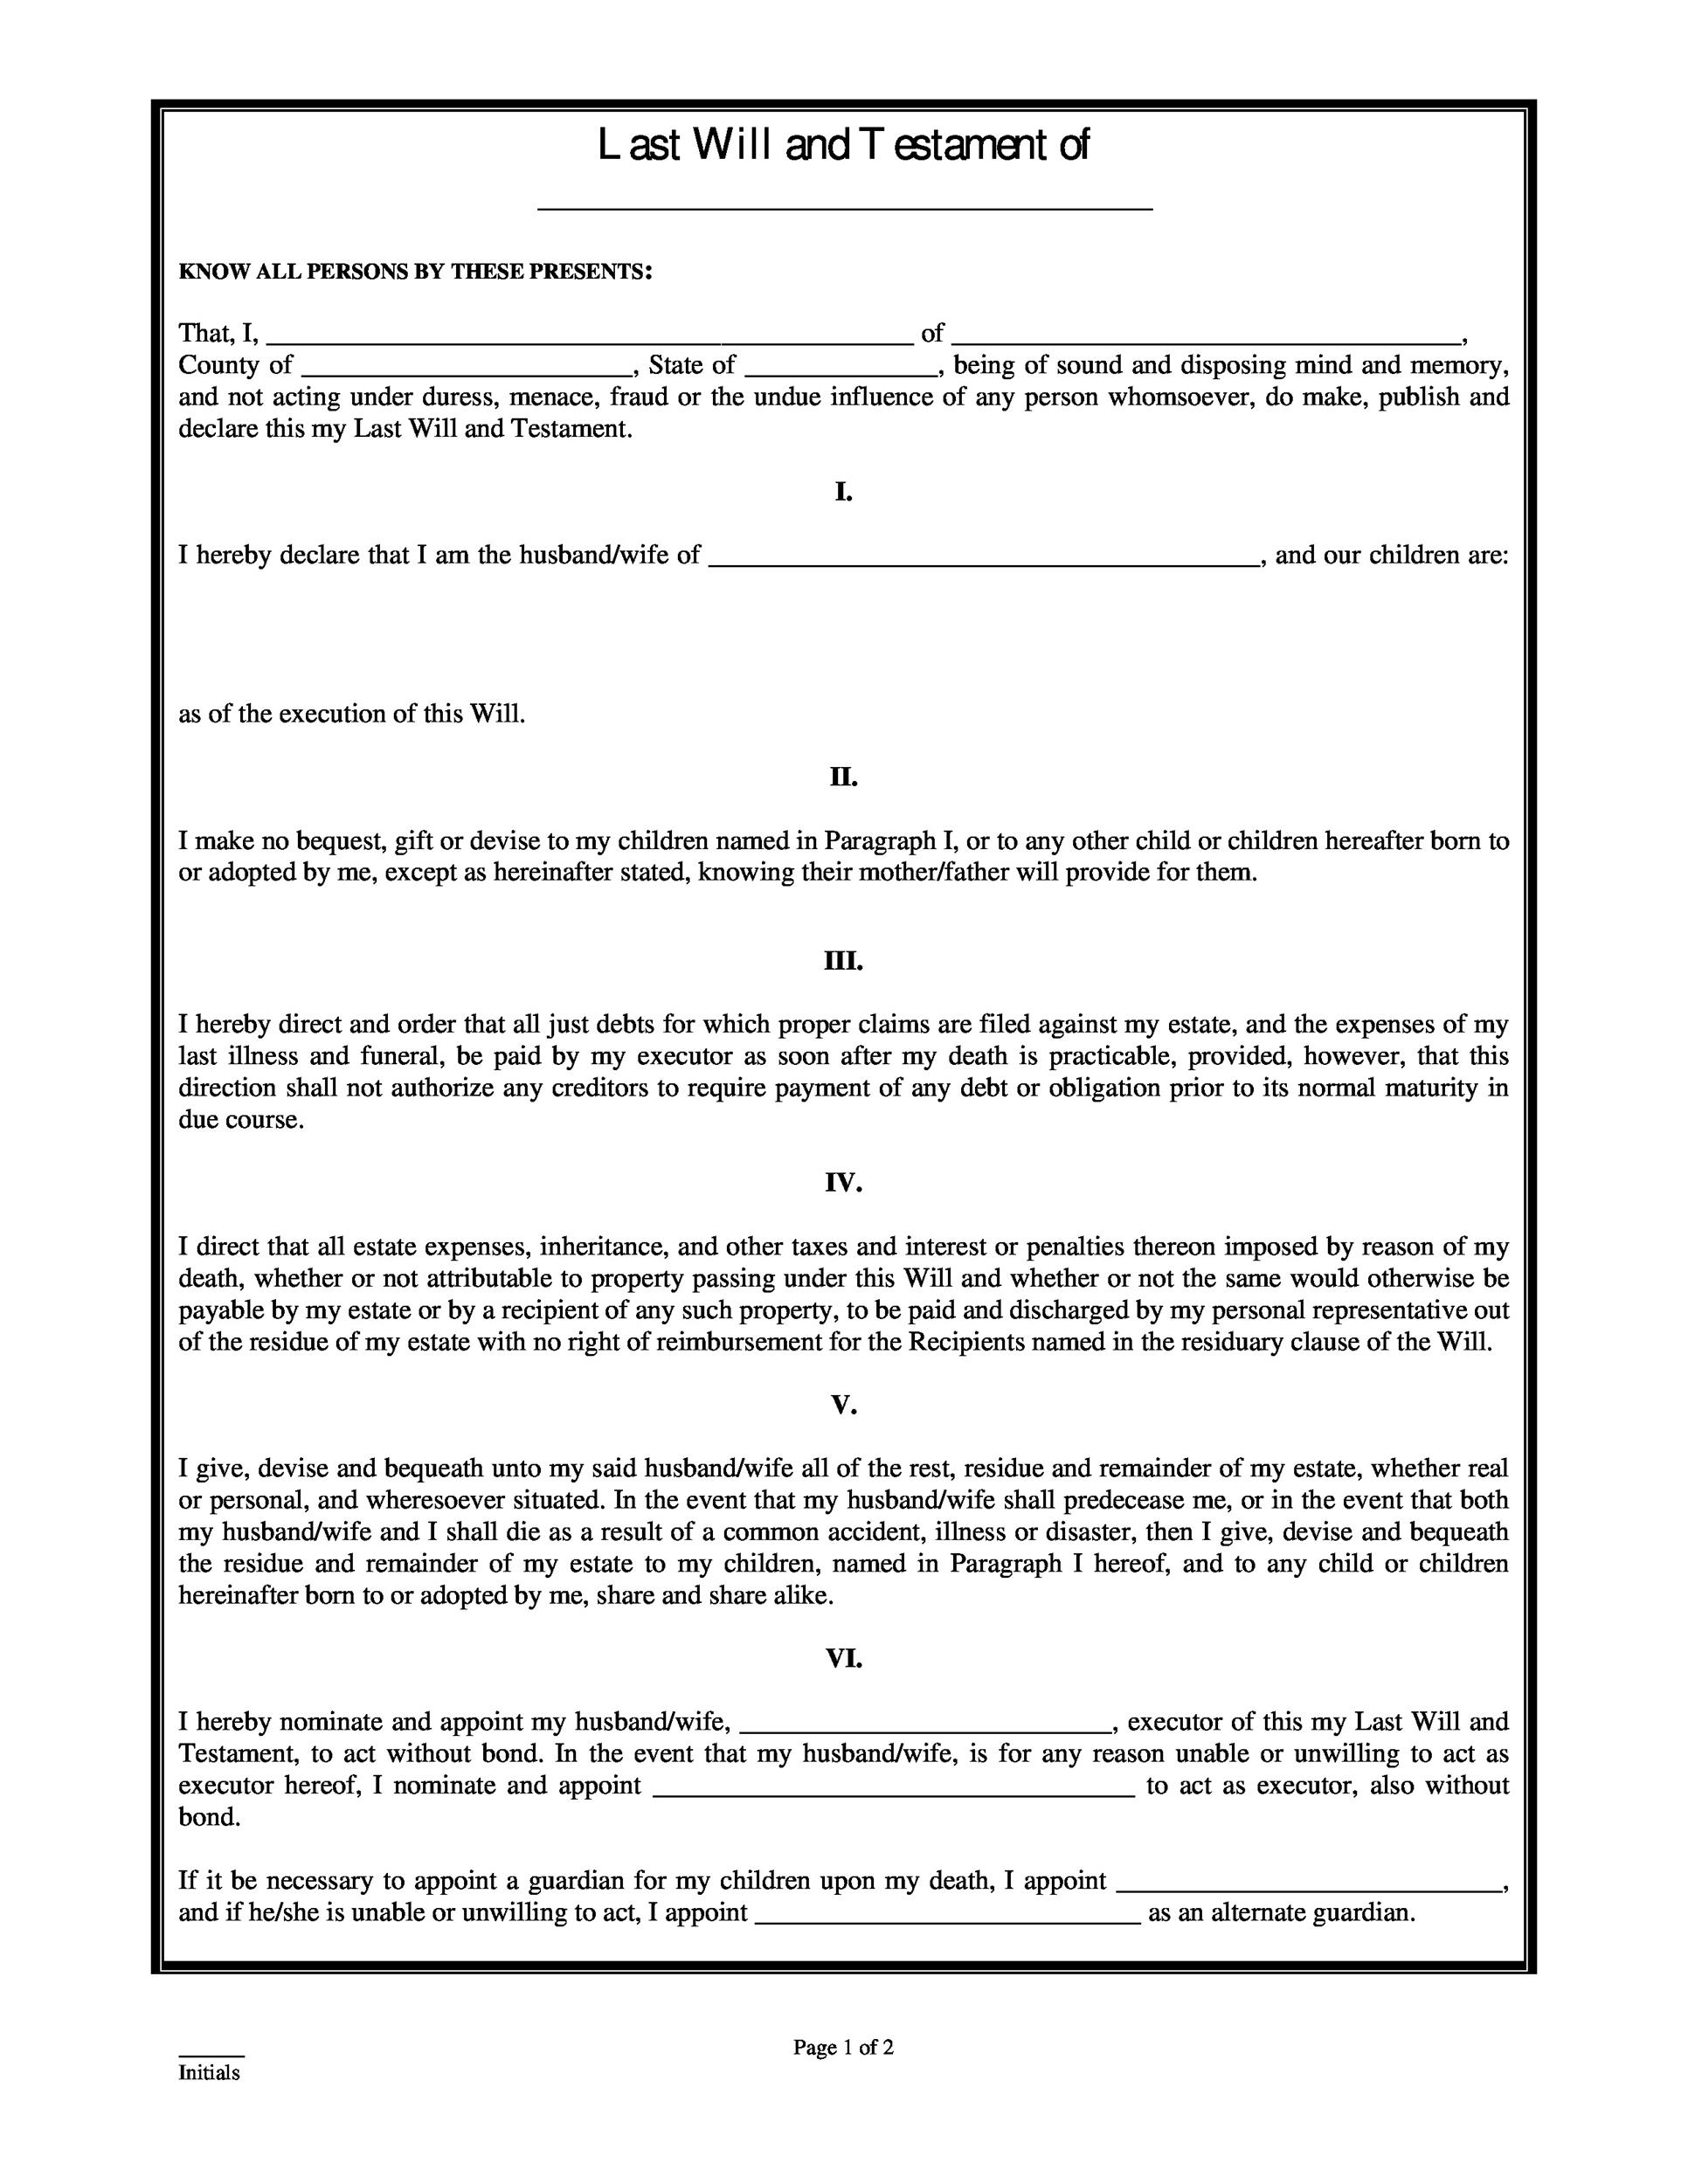 39 Last Will and Testament Forms & Templates Template Lab